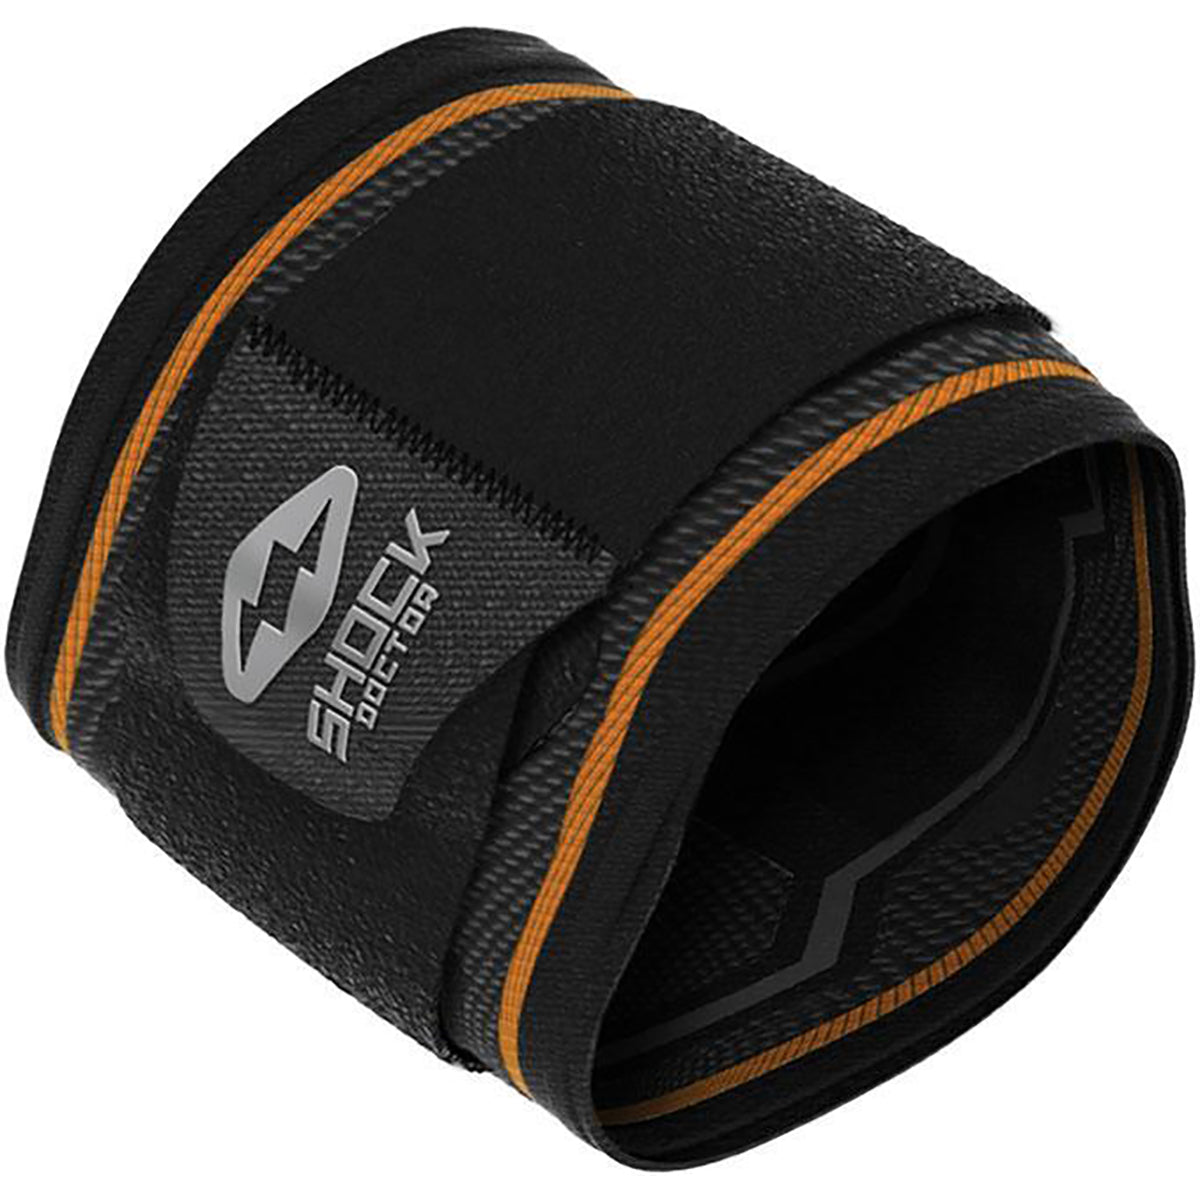 Shock Doctor Compression Knit Tennis/Golf Elbow Sleeve w/ Support - Black/Gray Shock Doctor